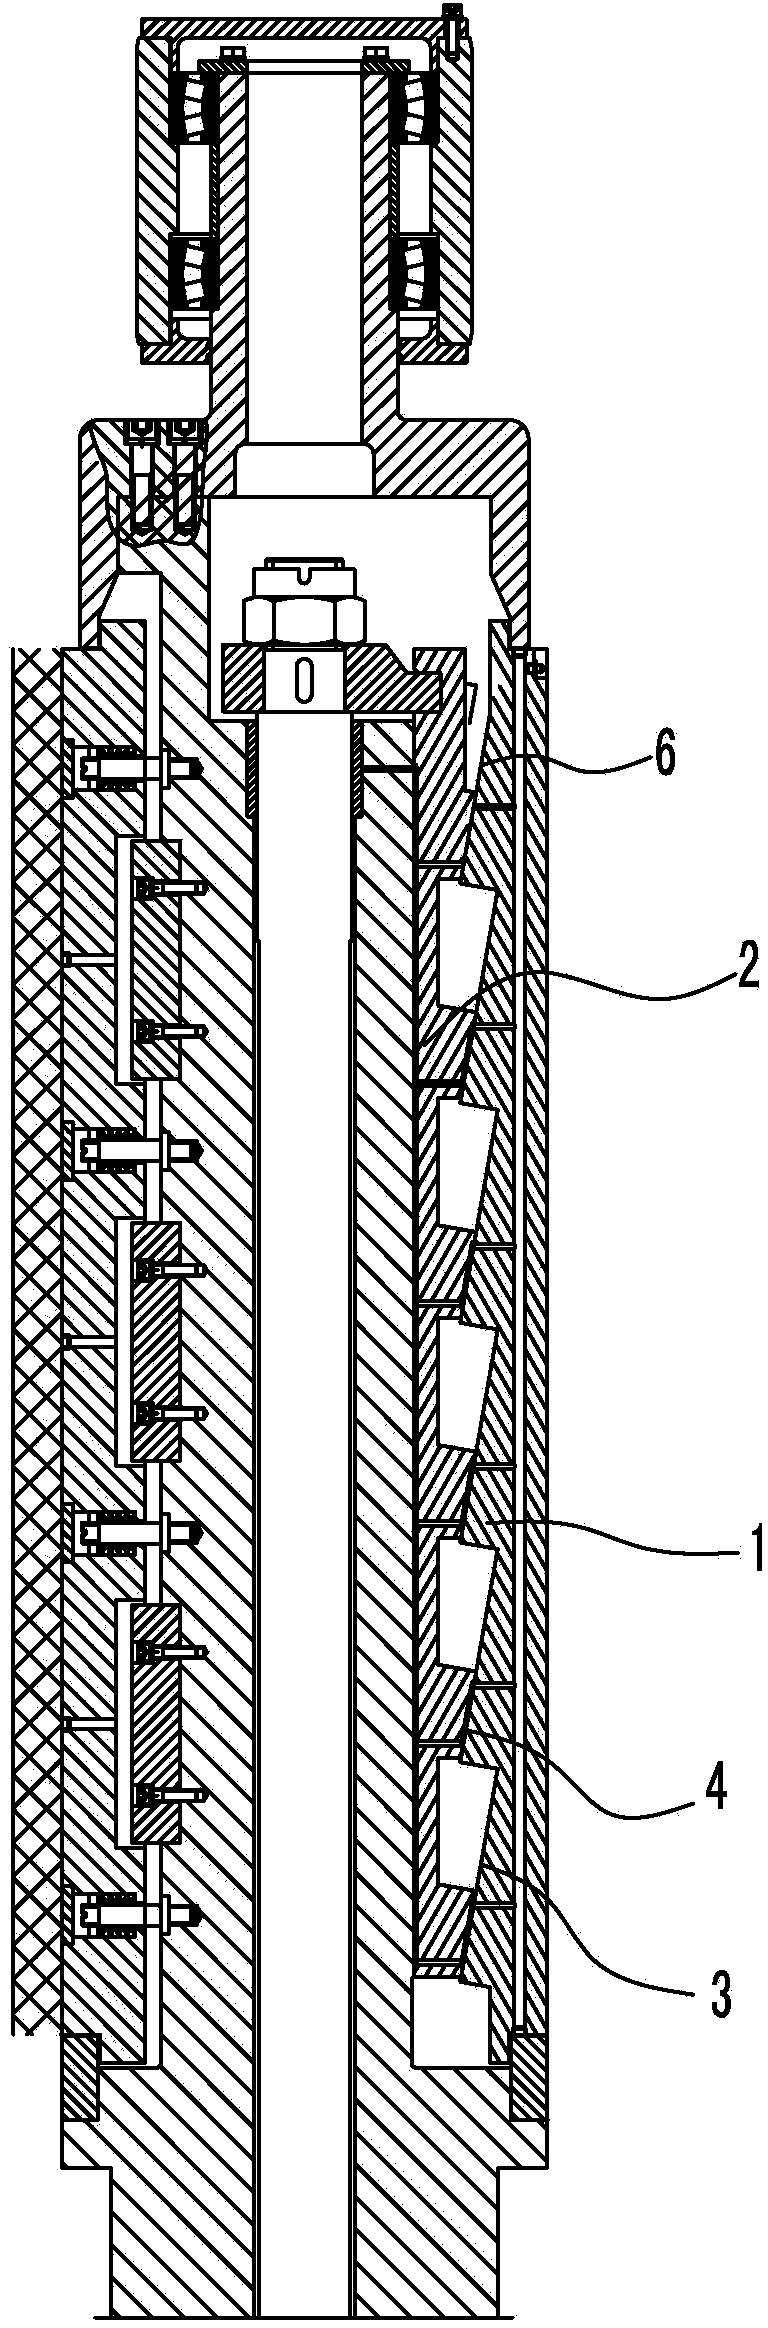 Parallelism detection method for contact surfaces of sector plate of coiling machine